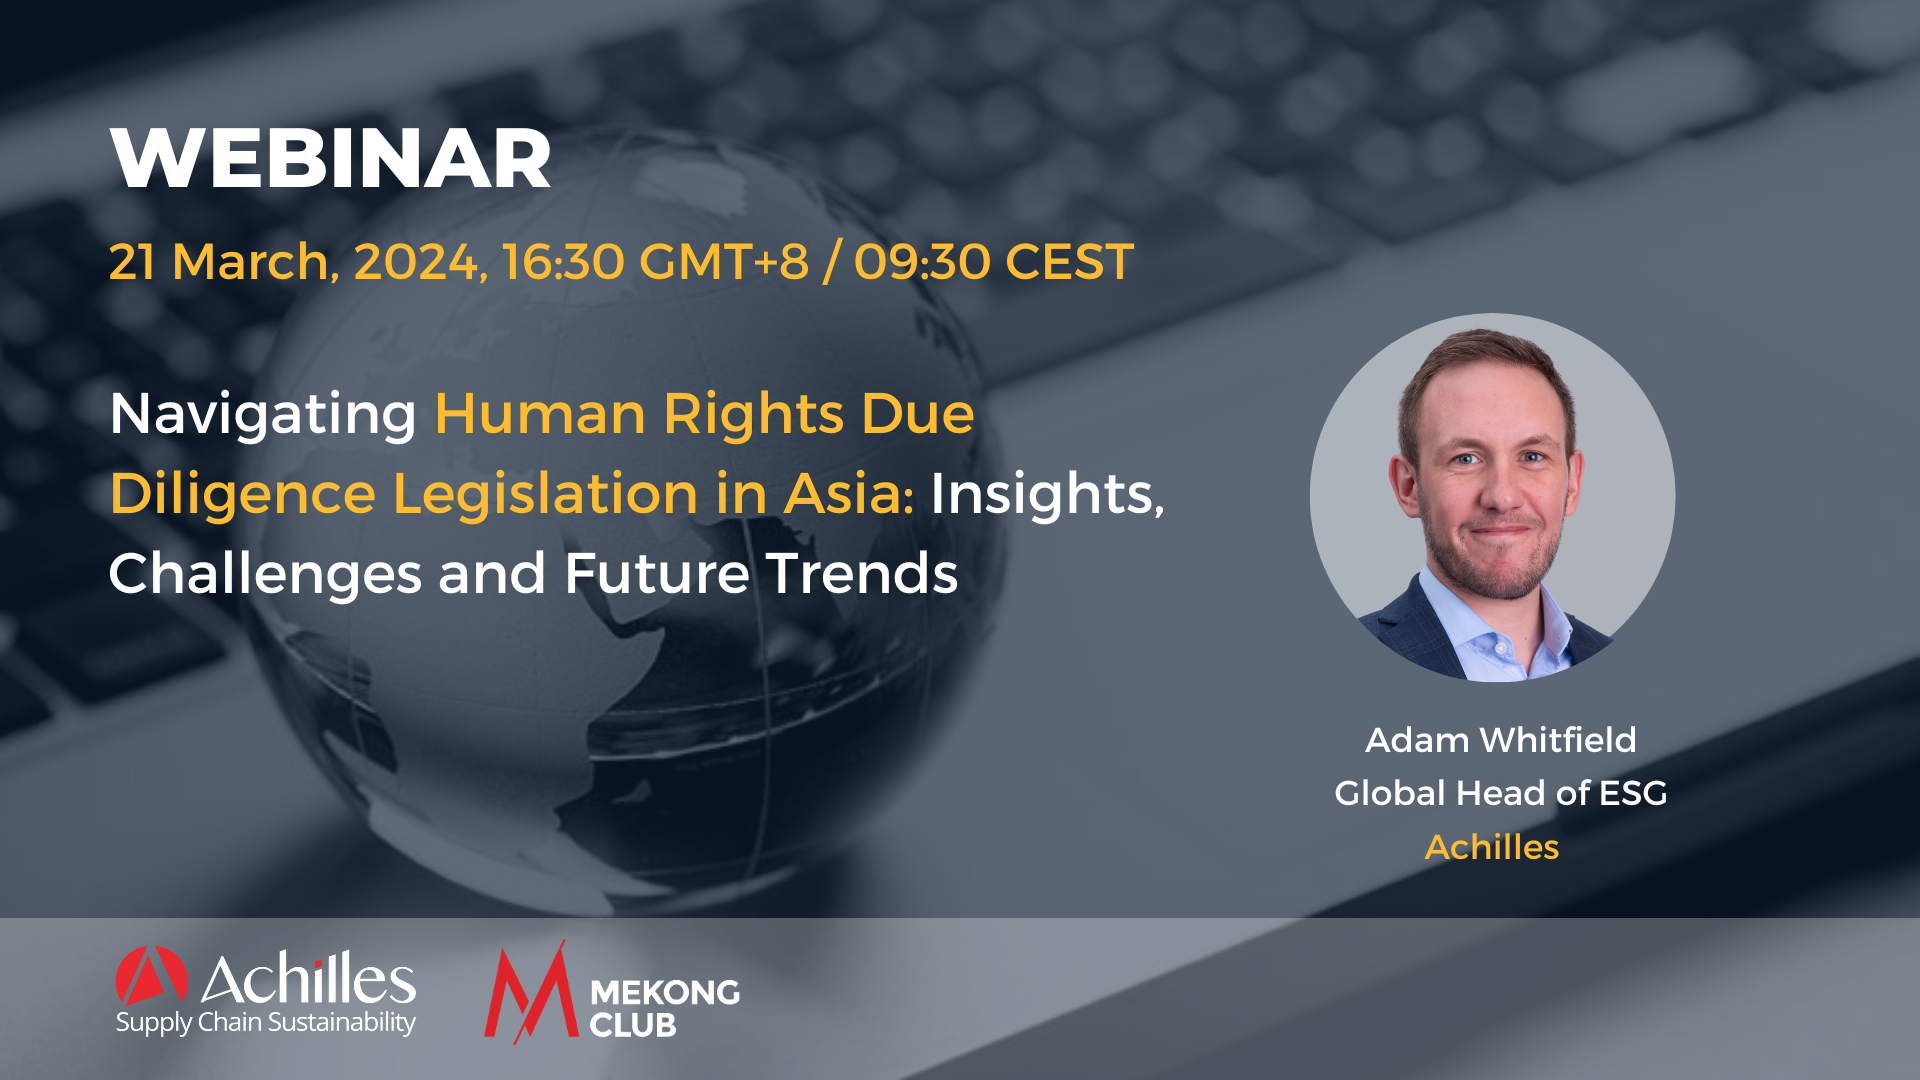 Navigating Human Rights Due Diligence Legislation in Asia: Insights, Challenges and Future Trends